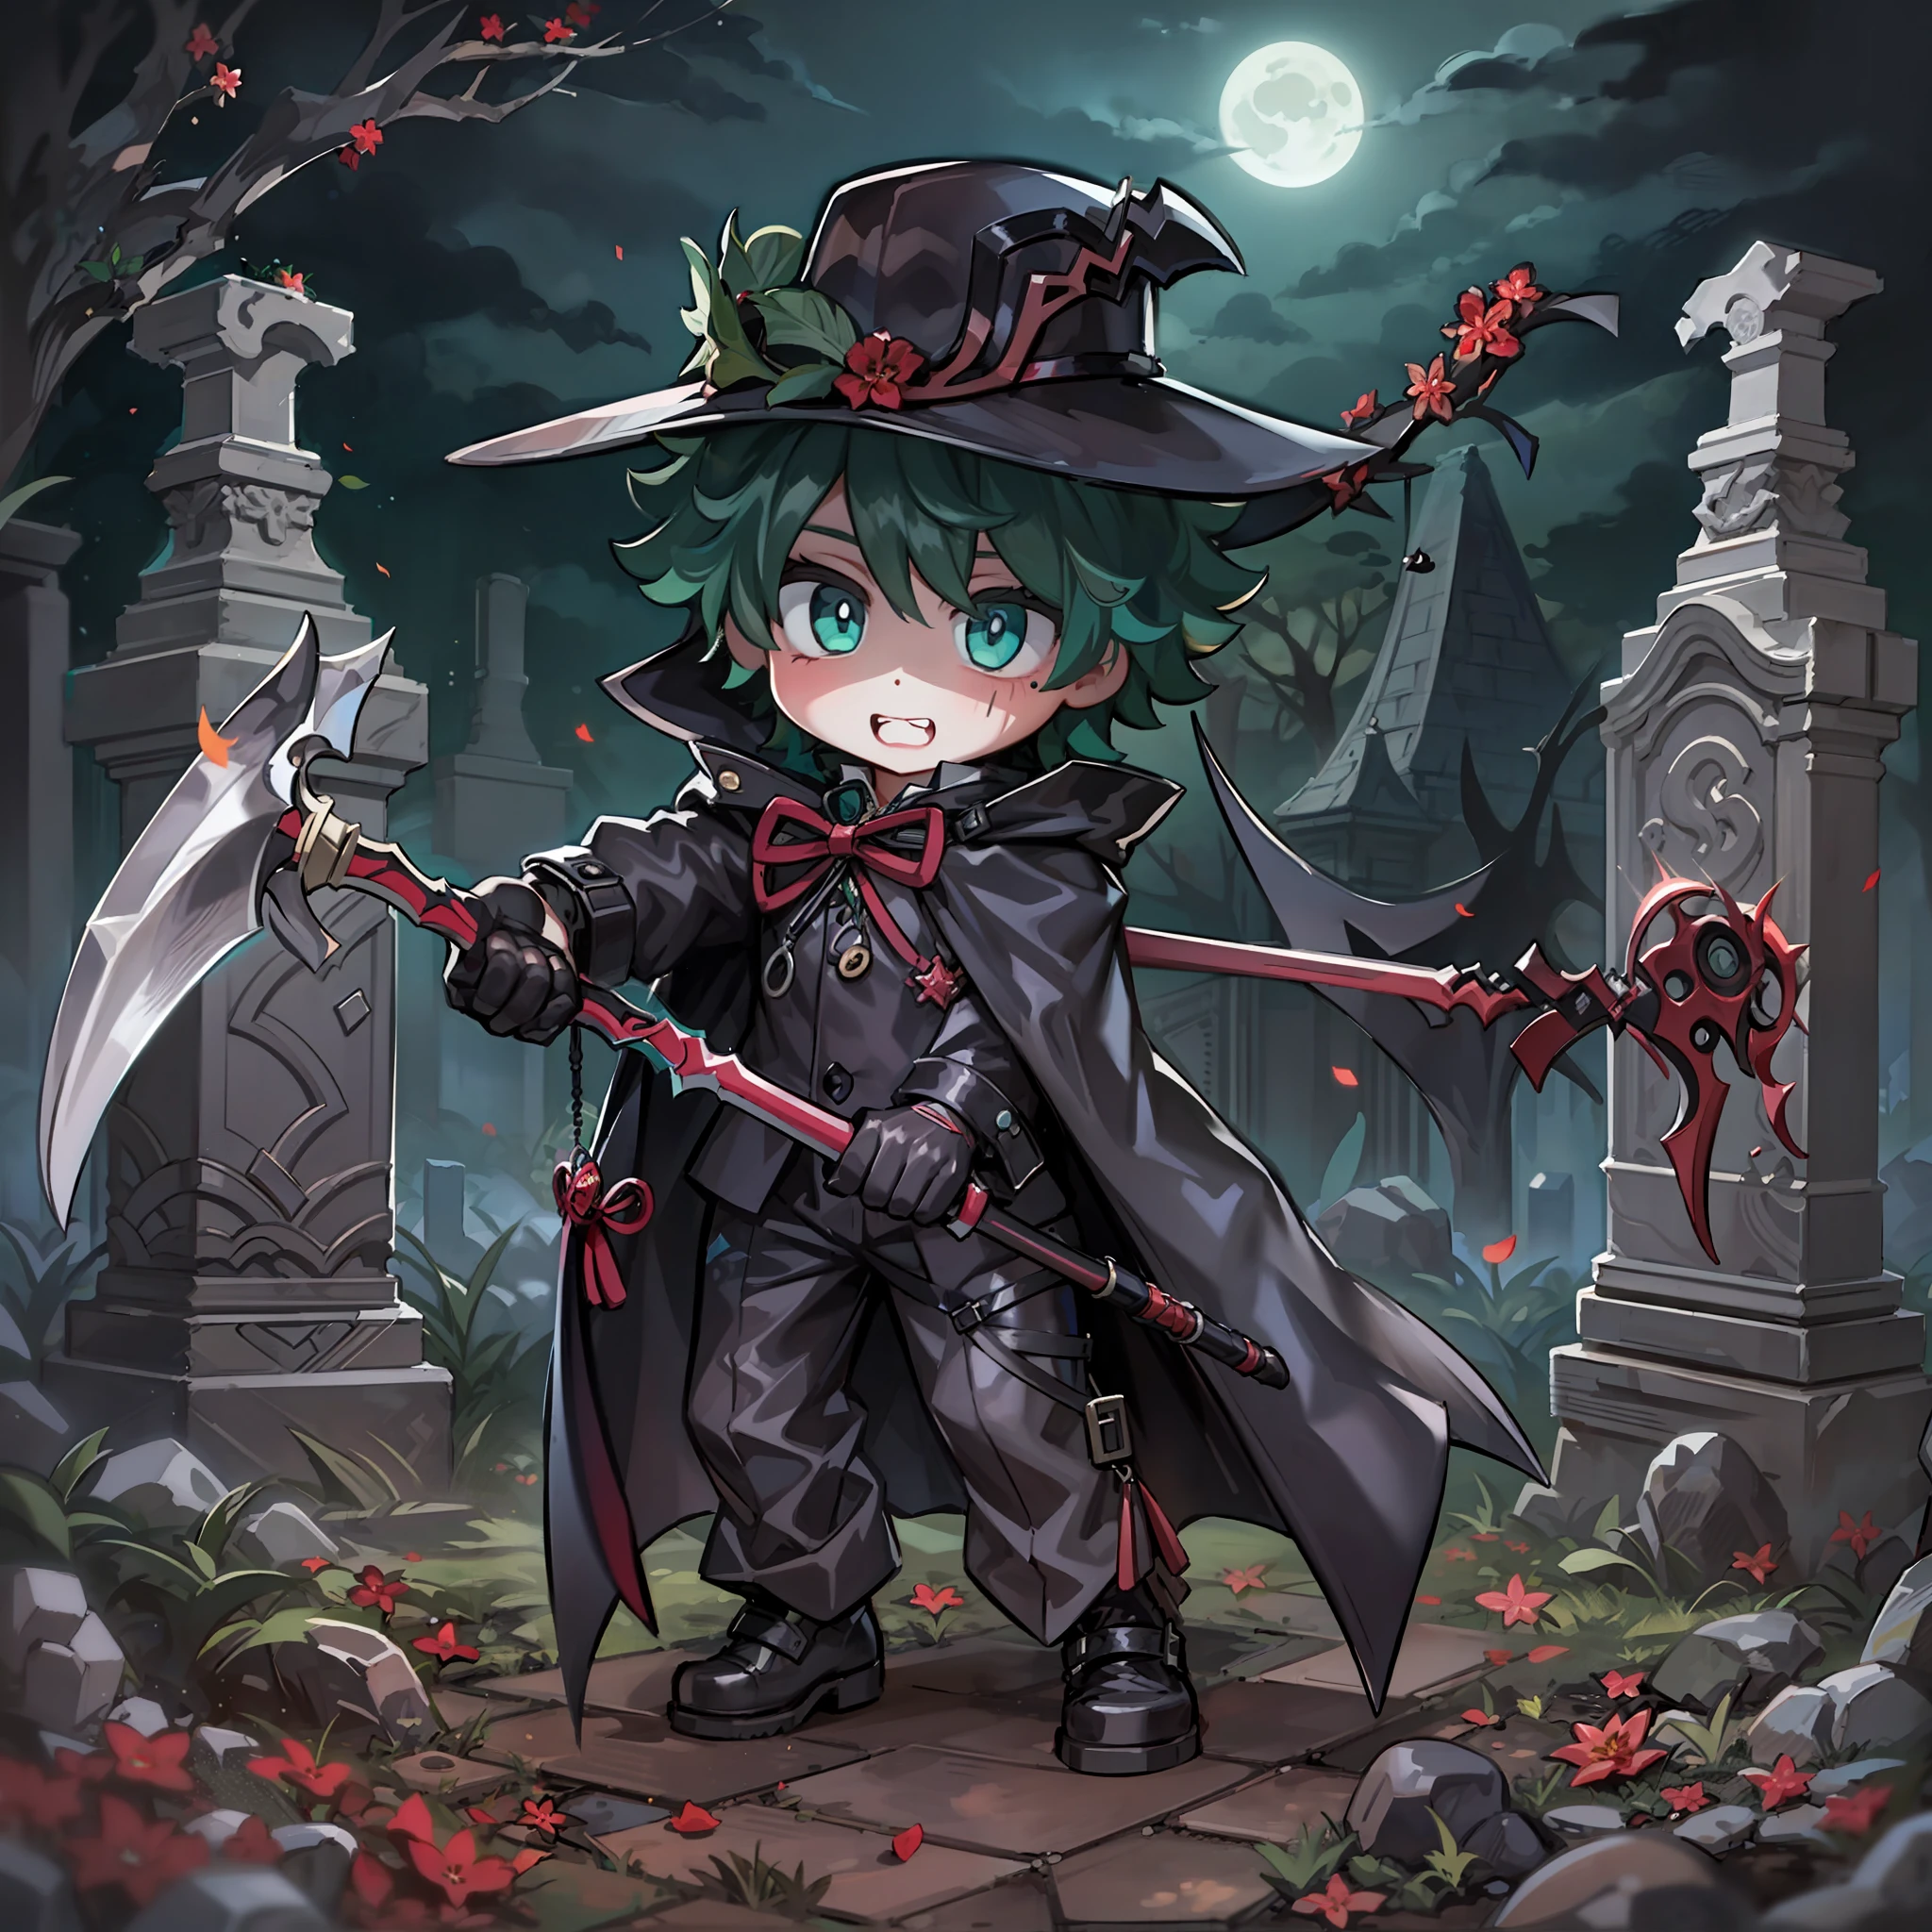 masterpiece, best quality, chibi,  Izuku Midoriya as the grim reaper wearing plague doctor's clothes wielding a scythe on a cementary under the crimson moonlight